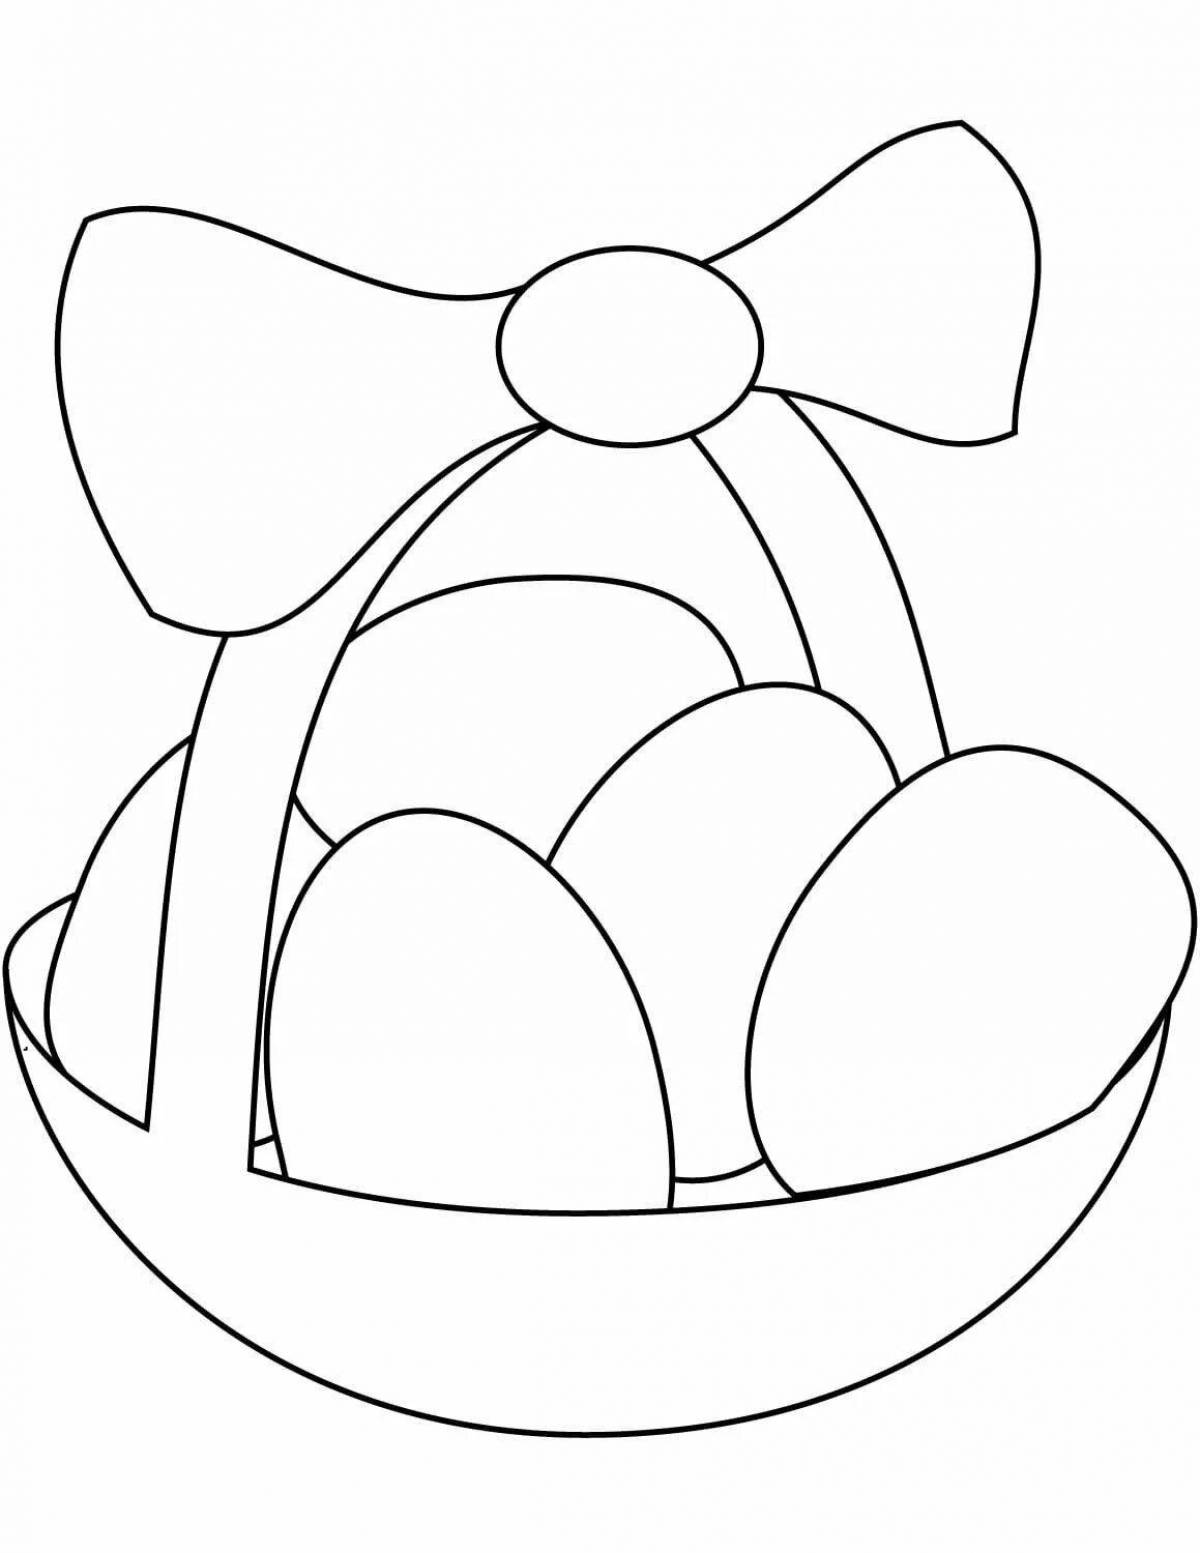 Chicken Egg Glossy Coloring Page